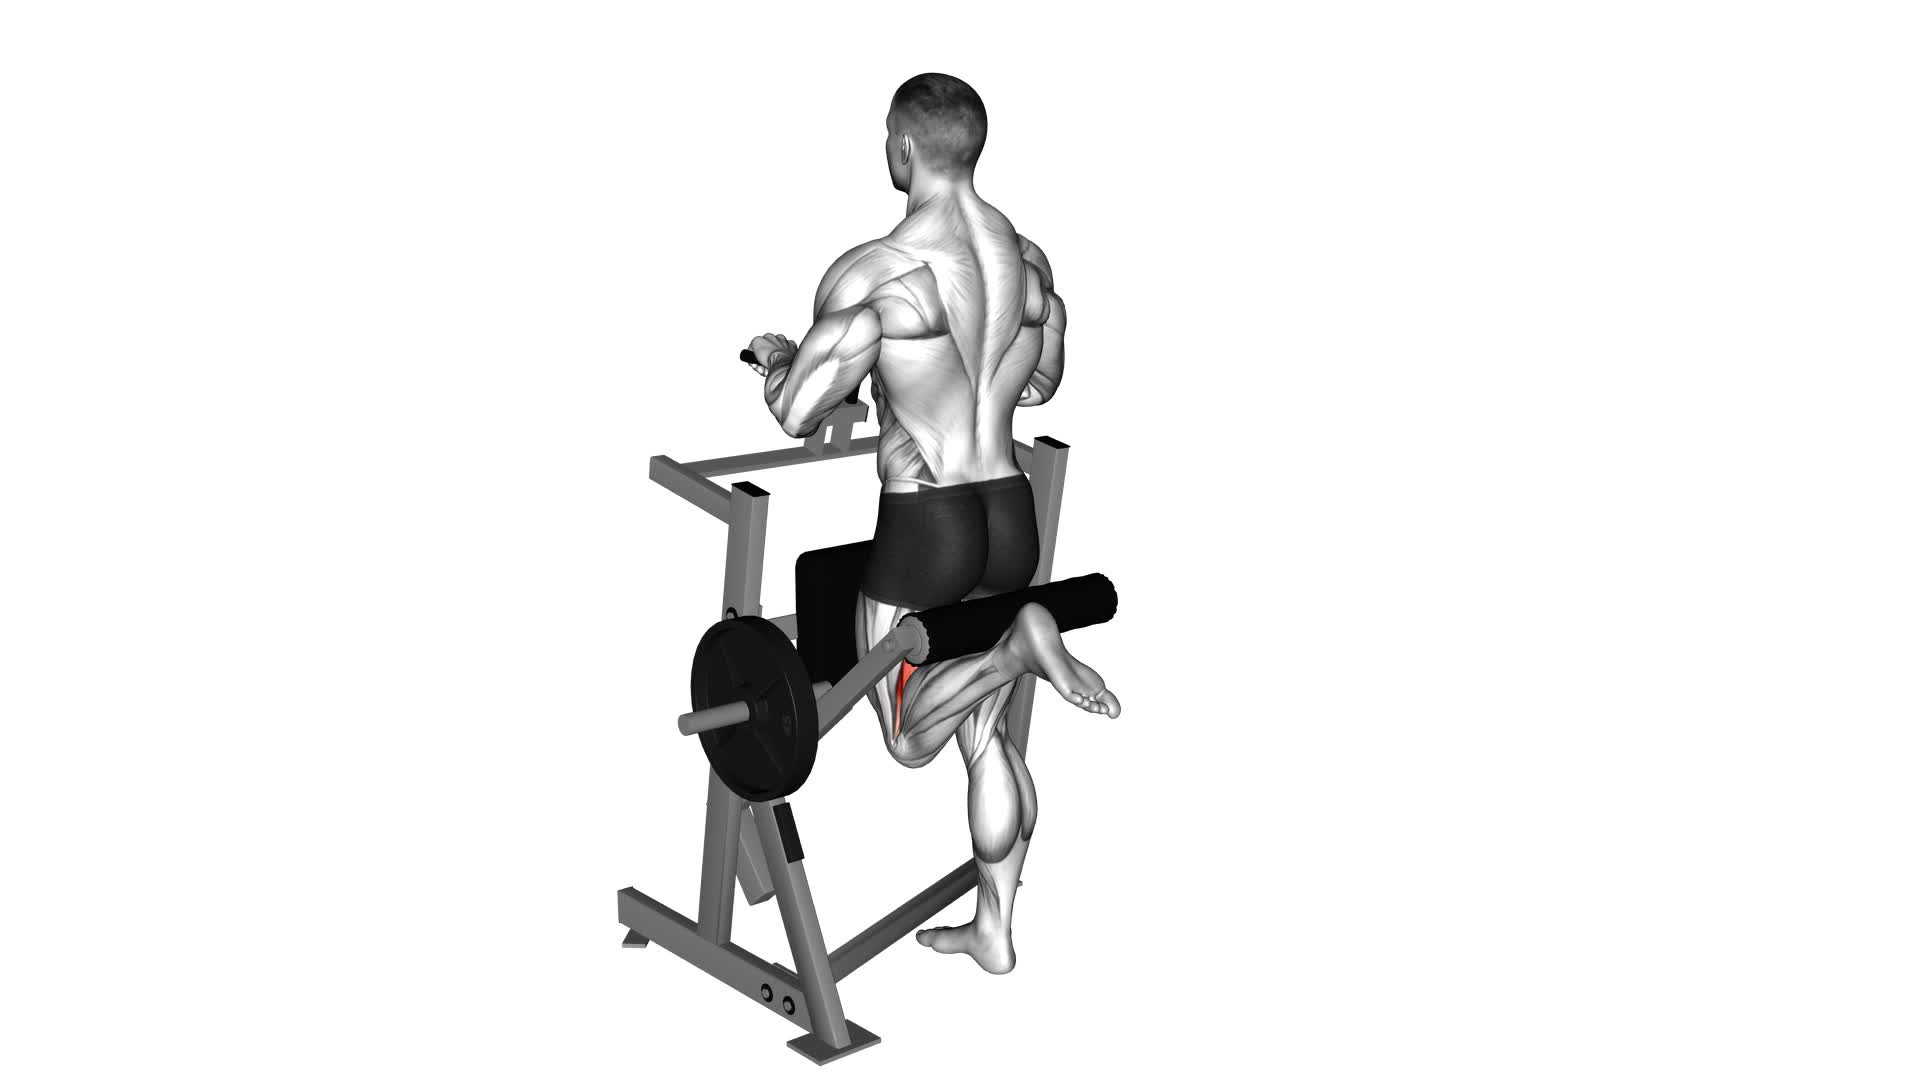 Lever Standing Single Leg Curl (Plate Loaded) - Video Exercise Guide & Tips